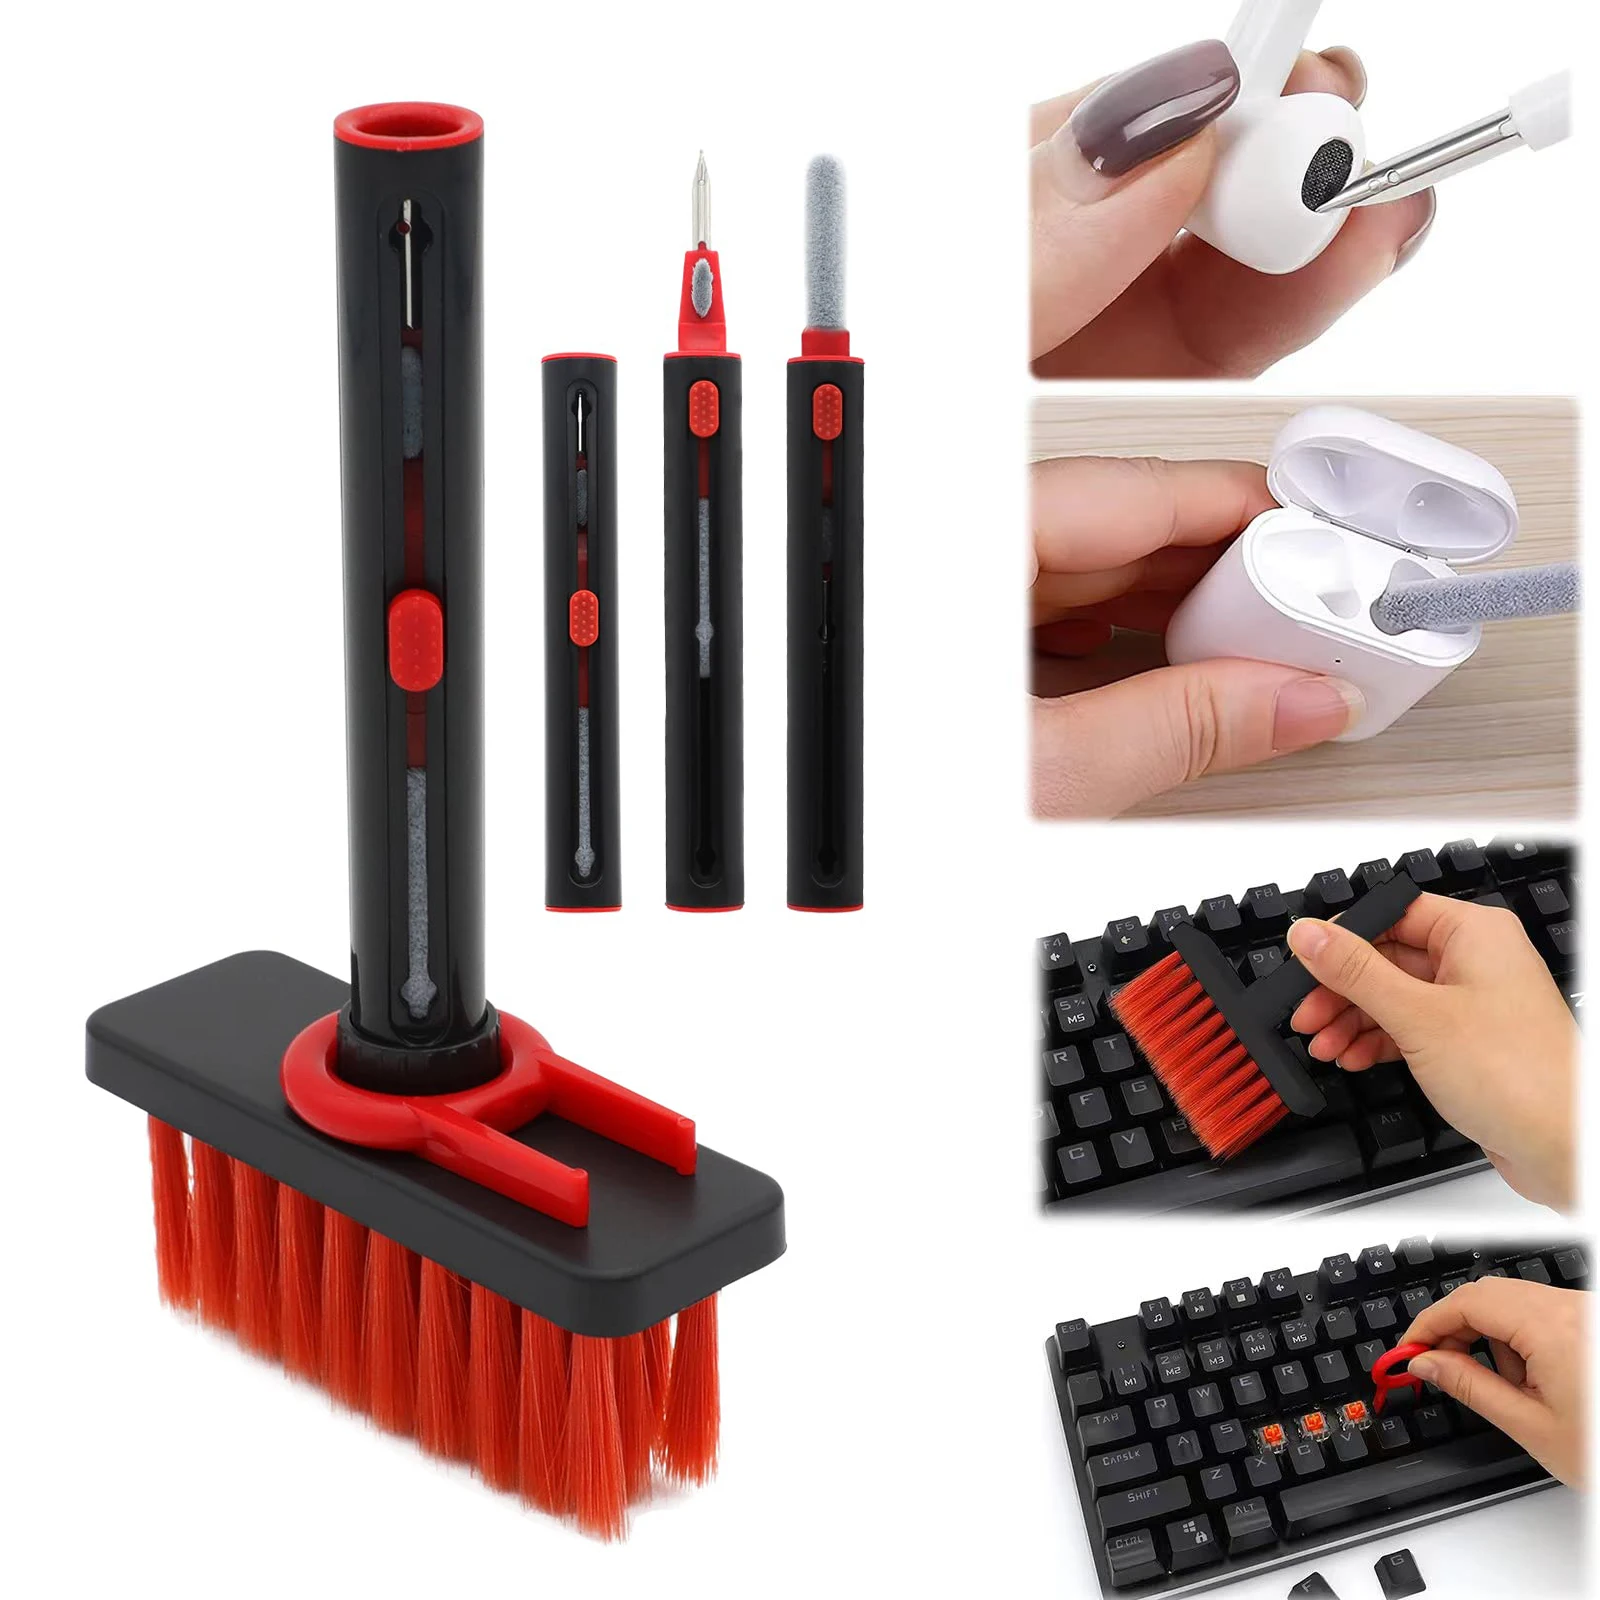 Keycap Puller Earbuds Cleaner For Airpods Pro 1 2 3 Bluetoot